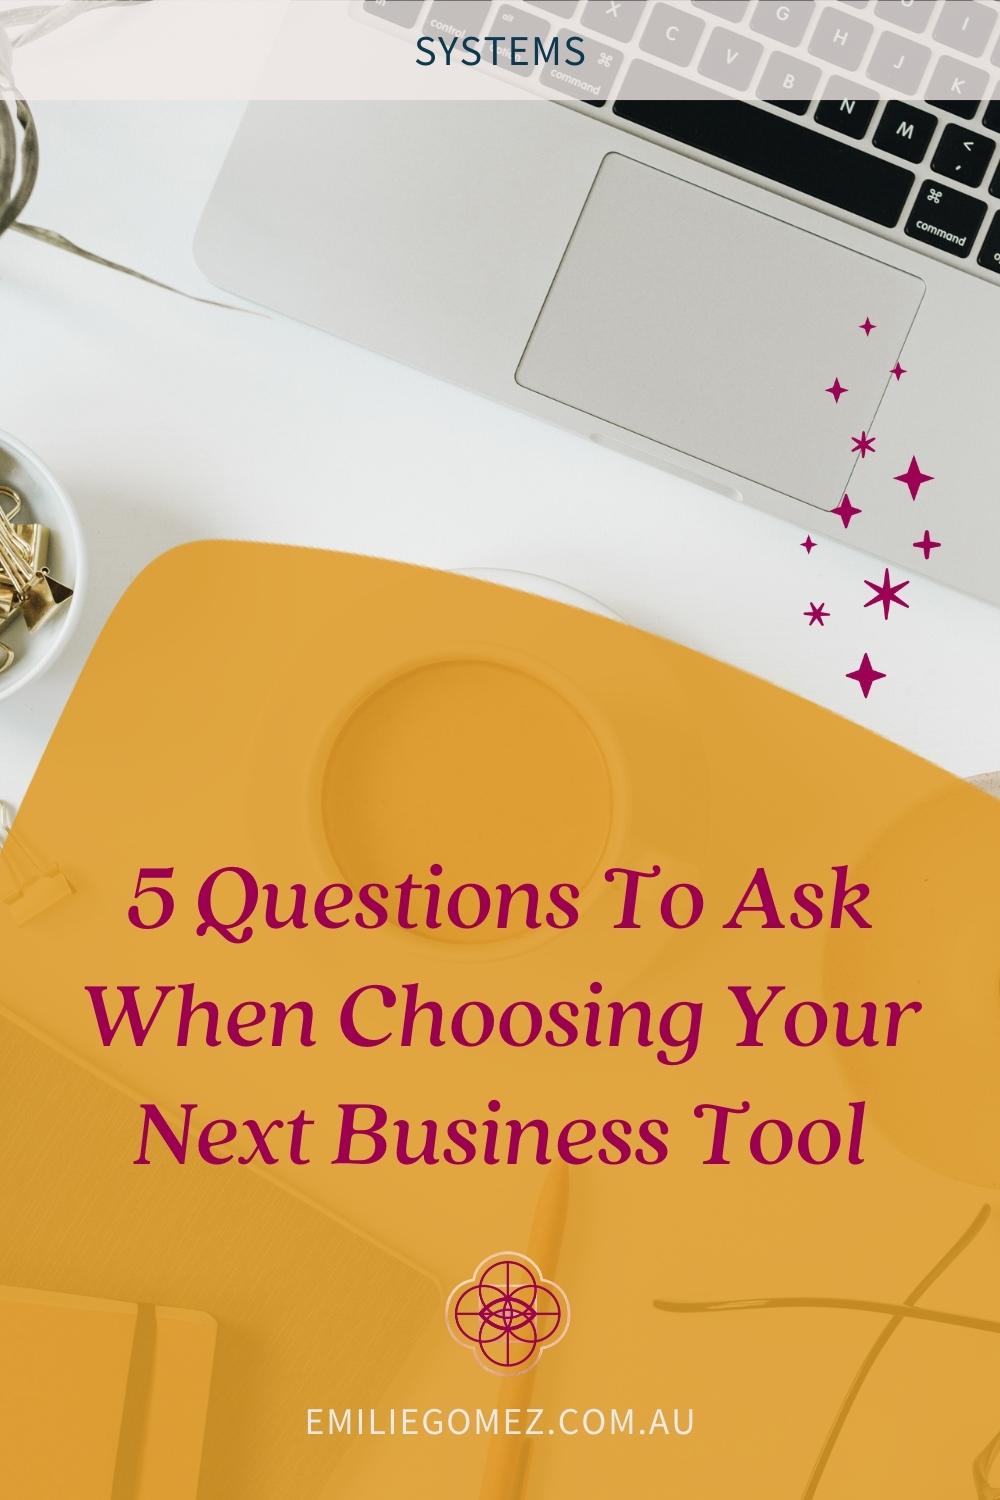 As a solopreneur running an online business, it’s important to choose the right business tools to run your business. But how do you do that when there are so many business tools on offer? You ask yourself these 5 questions! These questions will make sure you consider exactly what you need from your business tool and how it will fit in with your other business systems. Click through to see the questions and choose the best business tool for your business!